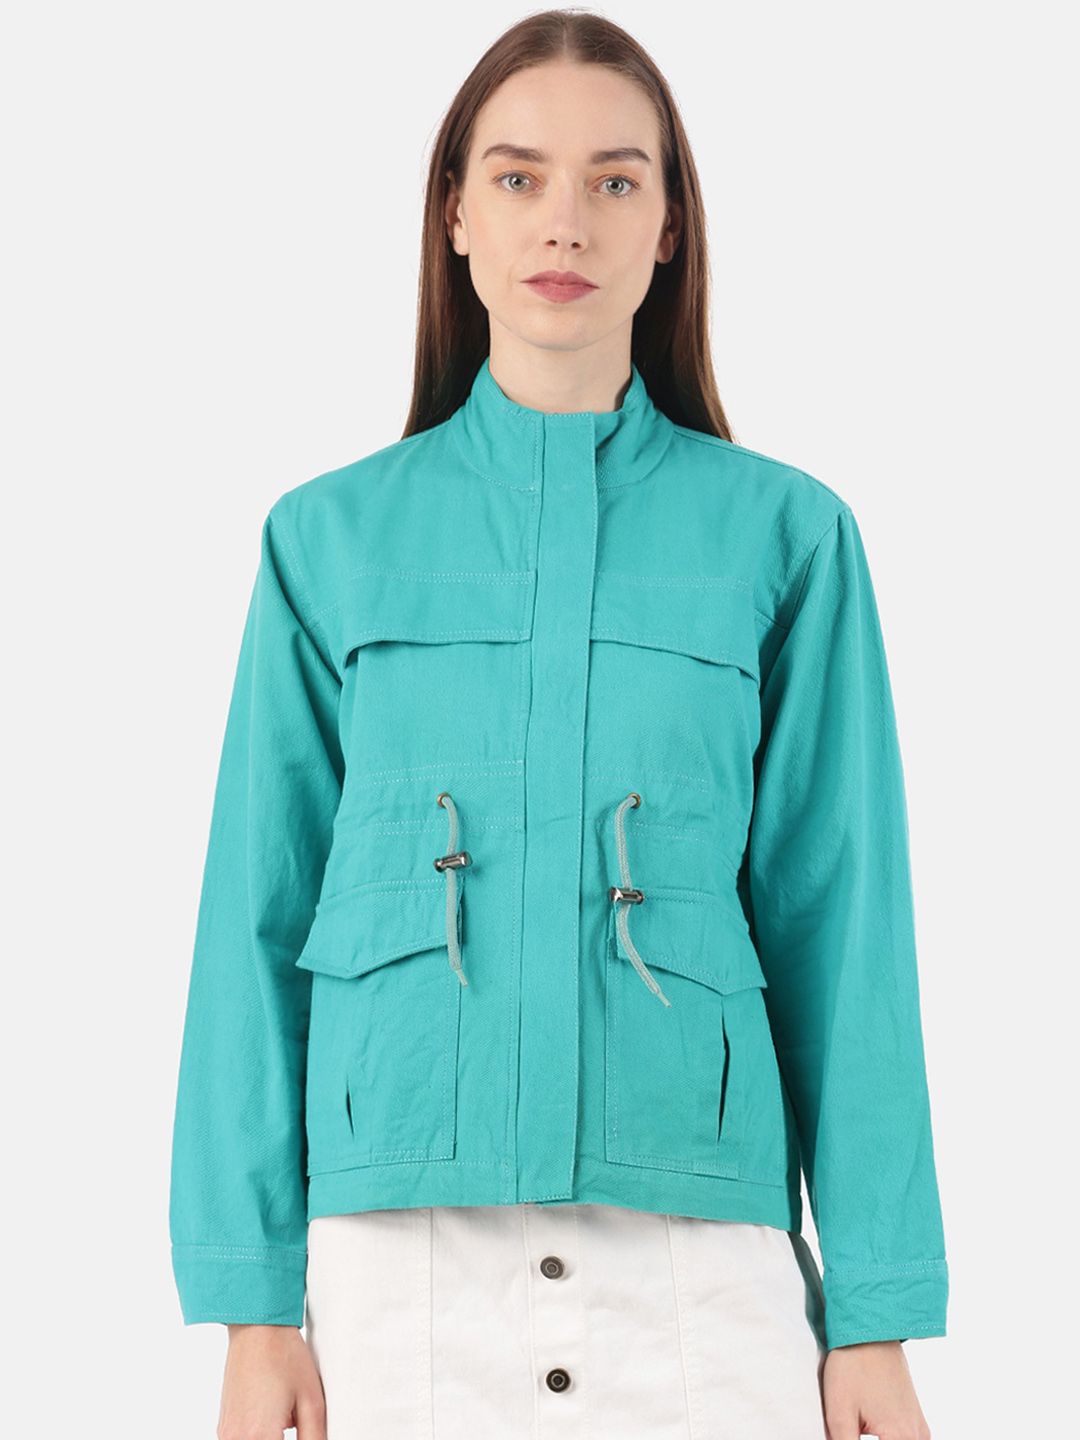 VOXATI Women Turquoise Blue Tailored Jacket Price in India